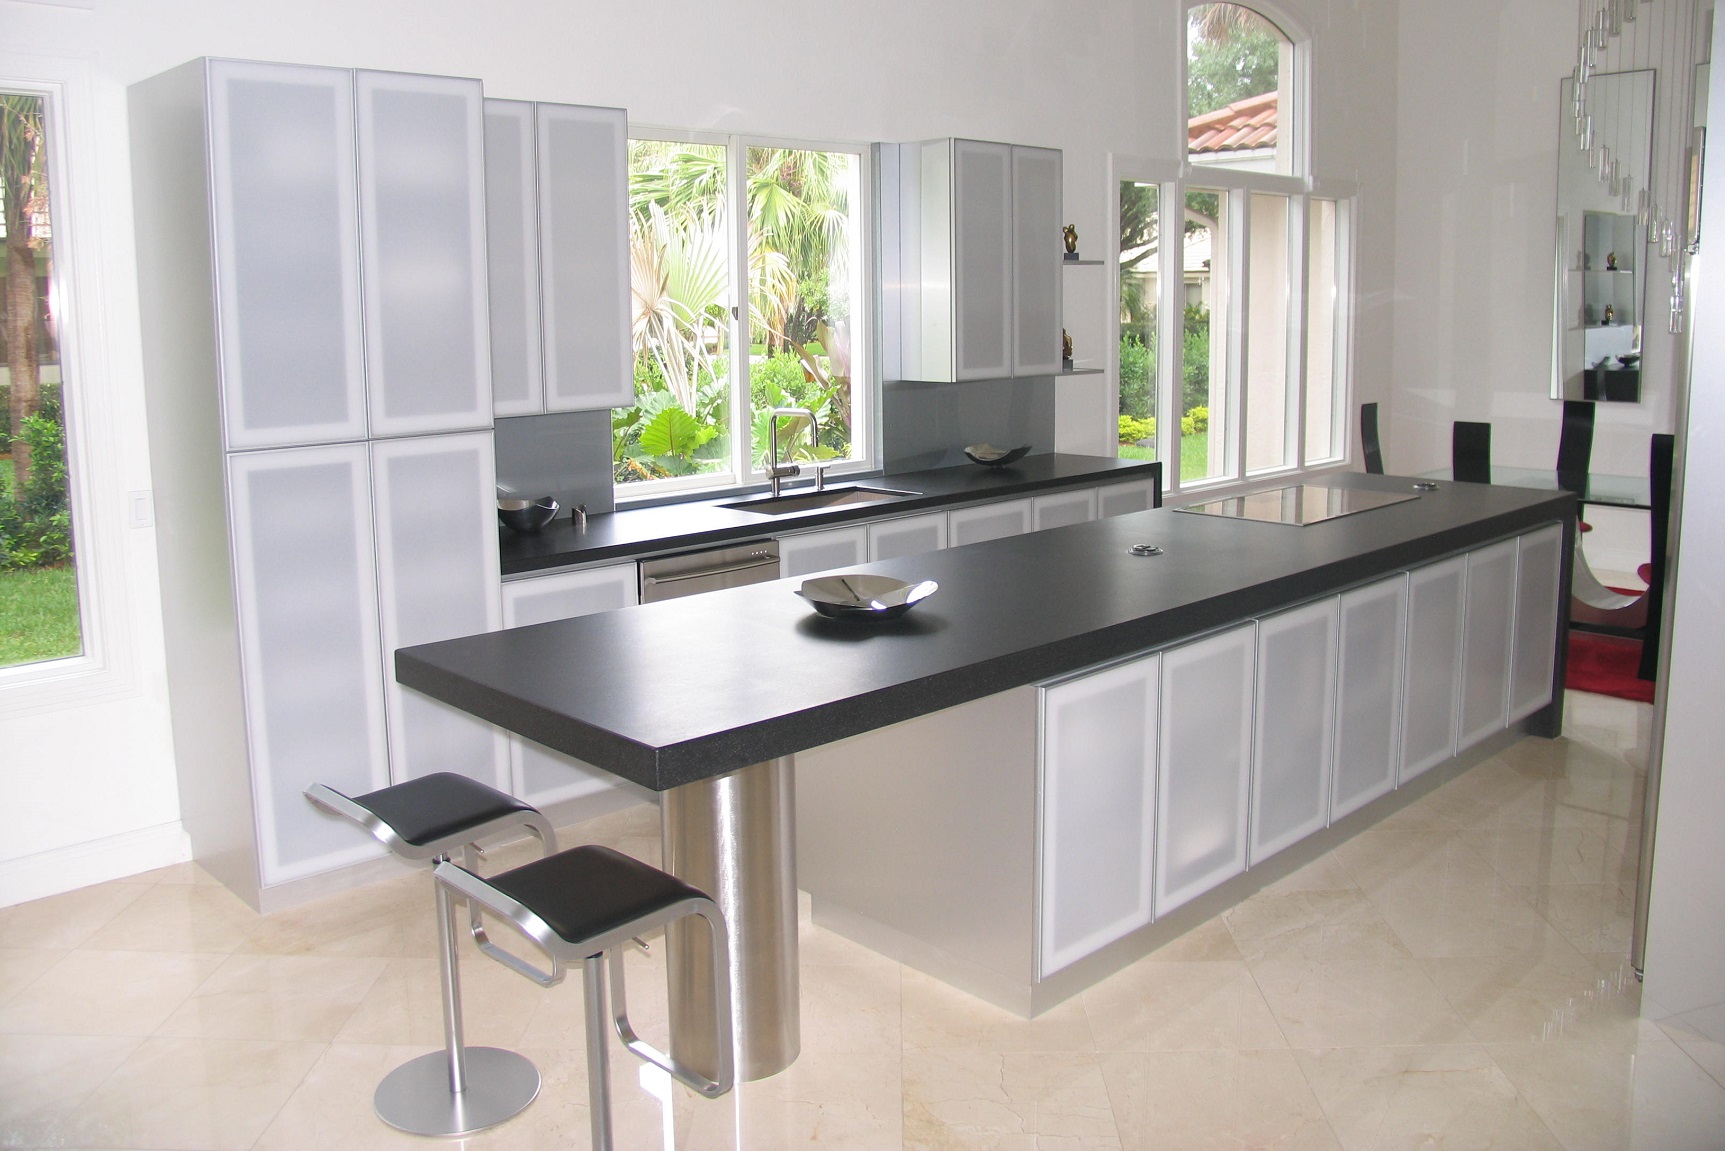 Kitchen Remodeling In Delray Beach Florida